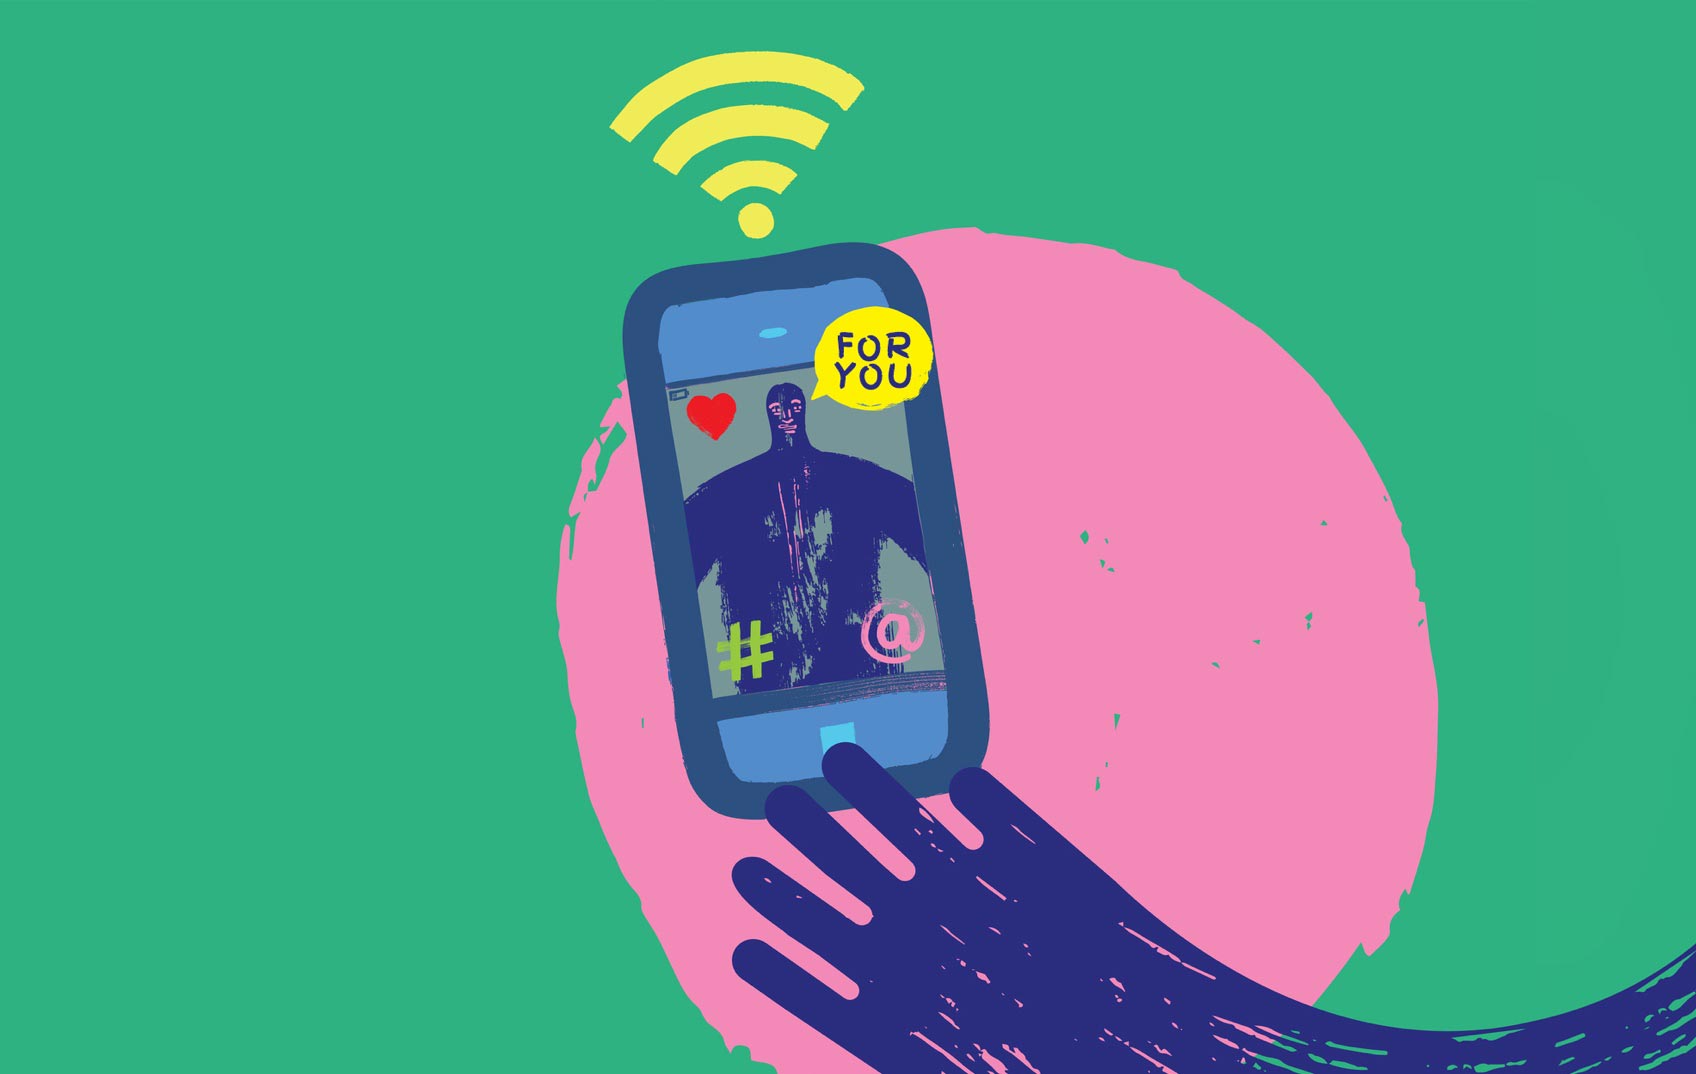 Colourful illustration of a hand holding a mobile with on-screen notifications going off